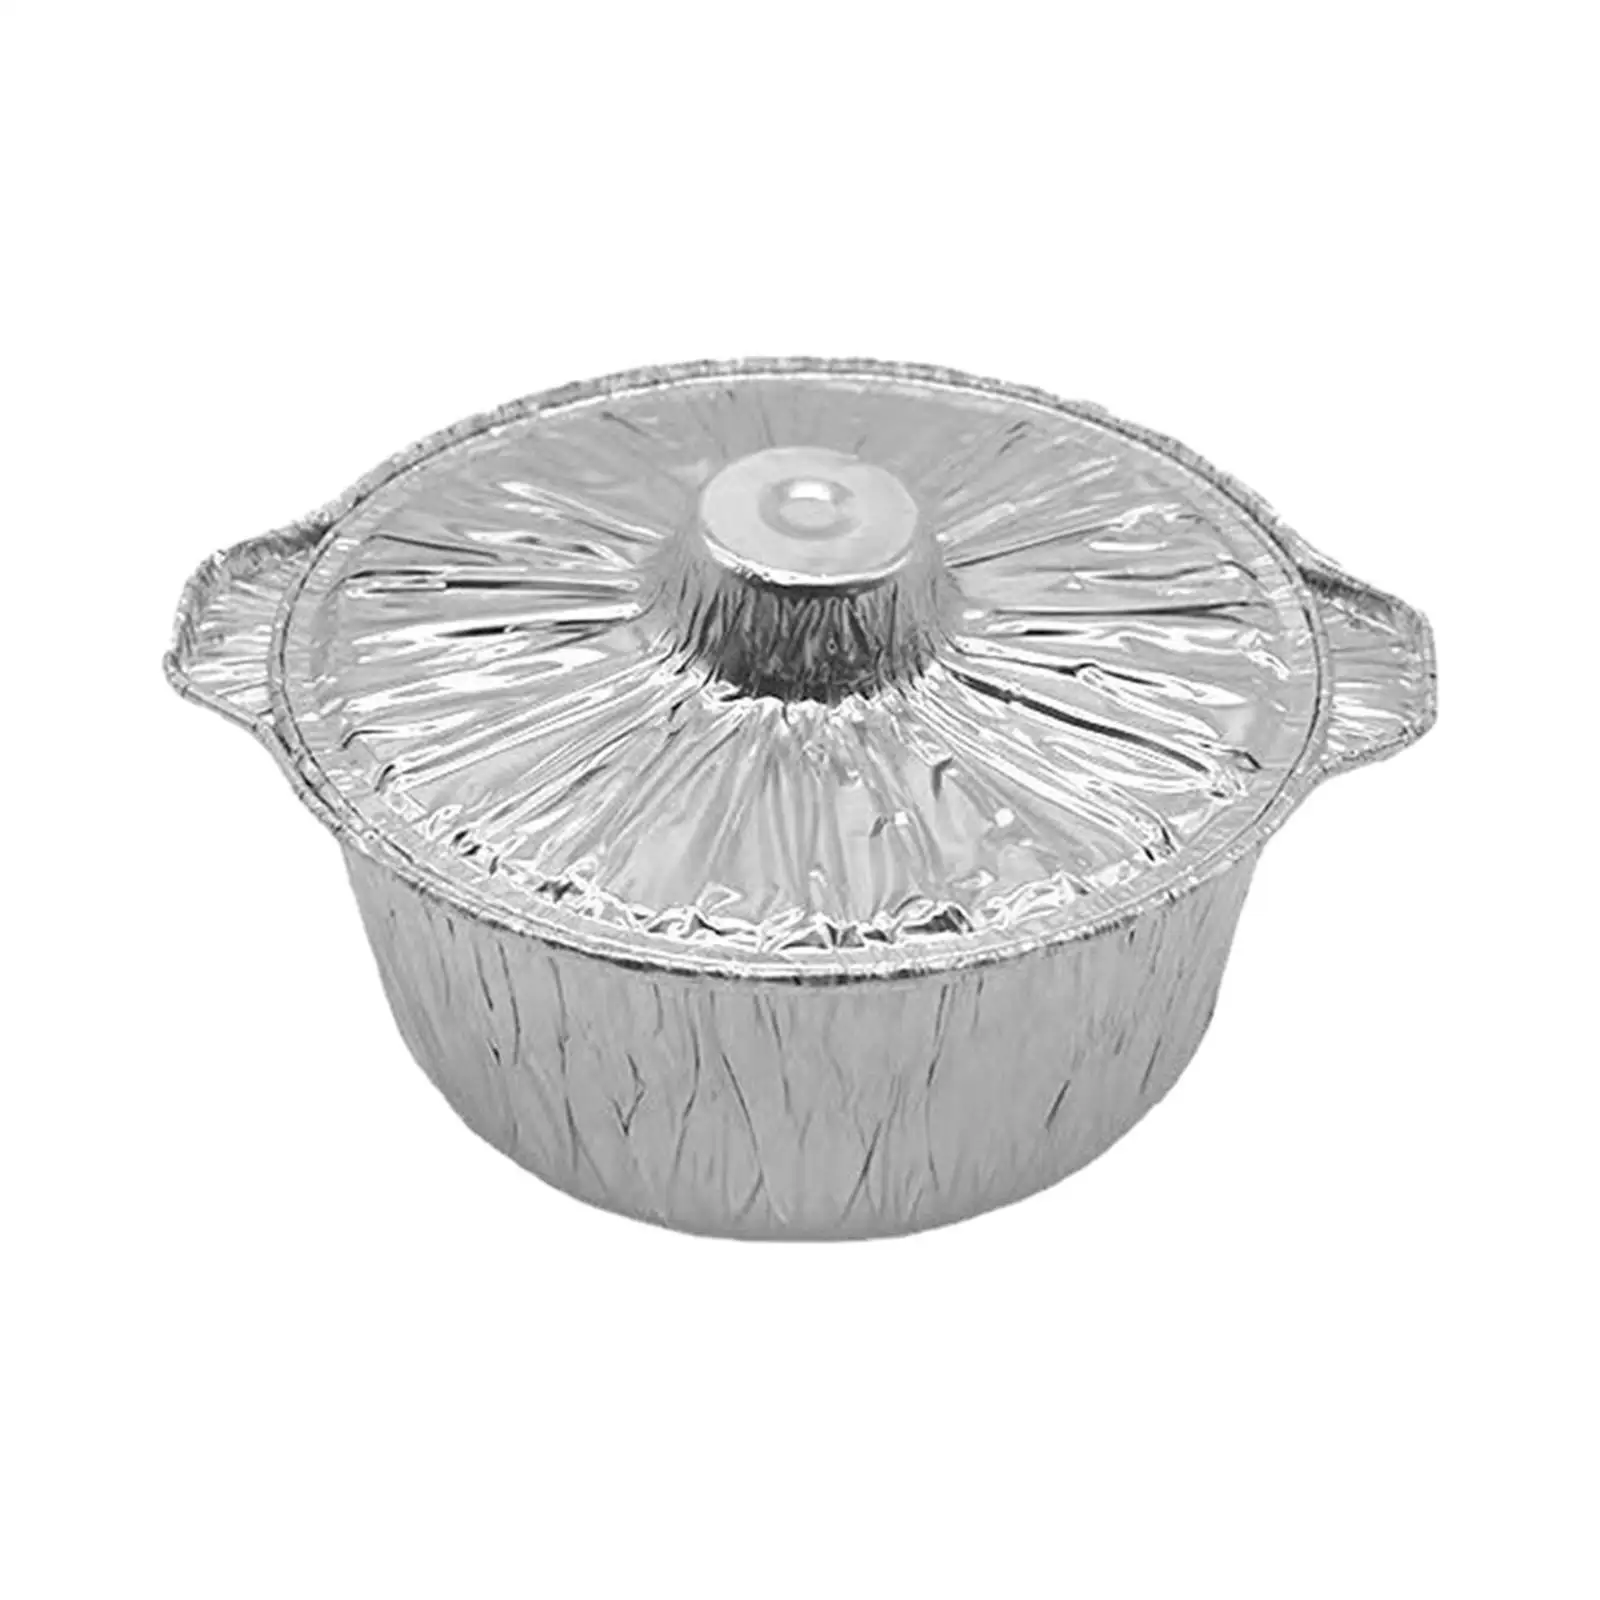 Meat Pot Bakeware Cake Pan Pie Pan Stockpot Disposable Cooking Pot Baking Tin Pot for Events Vacation Barbecue Broiling Trips